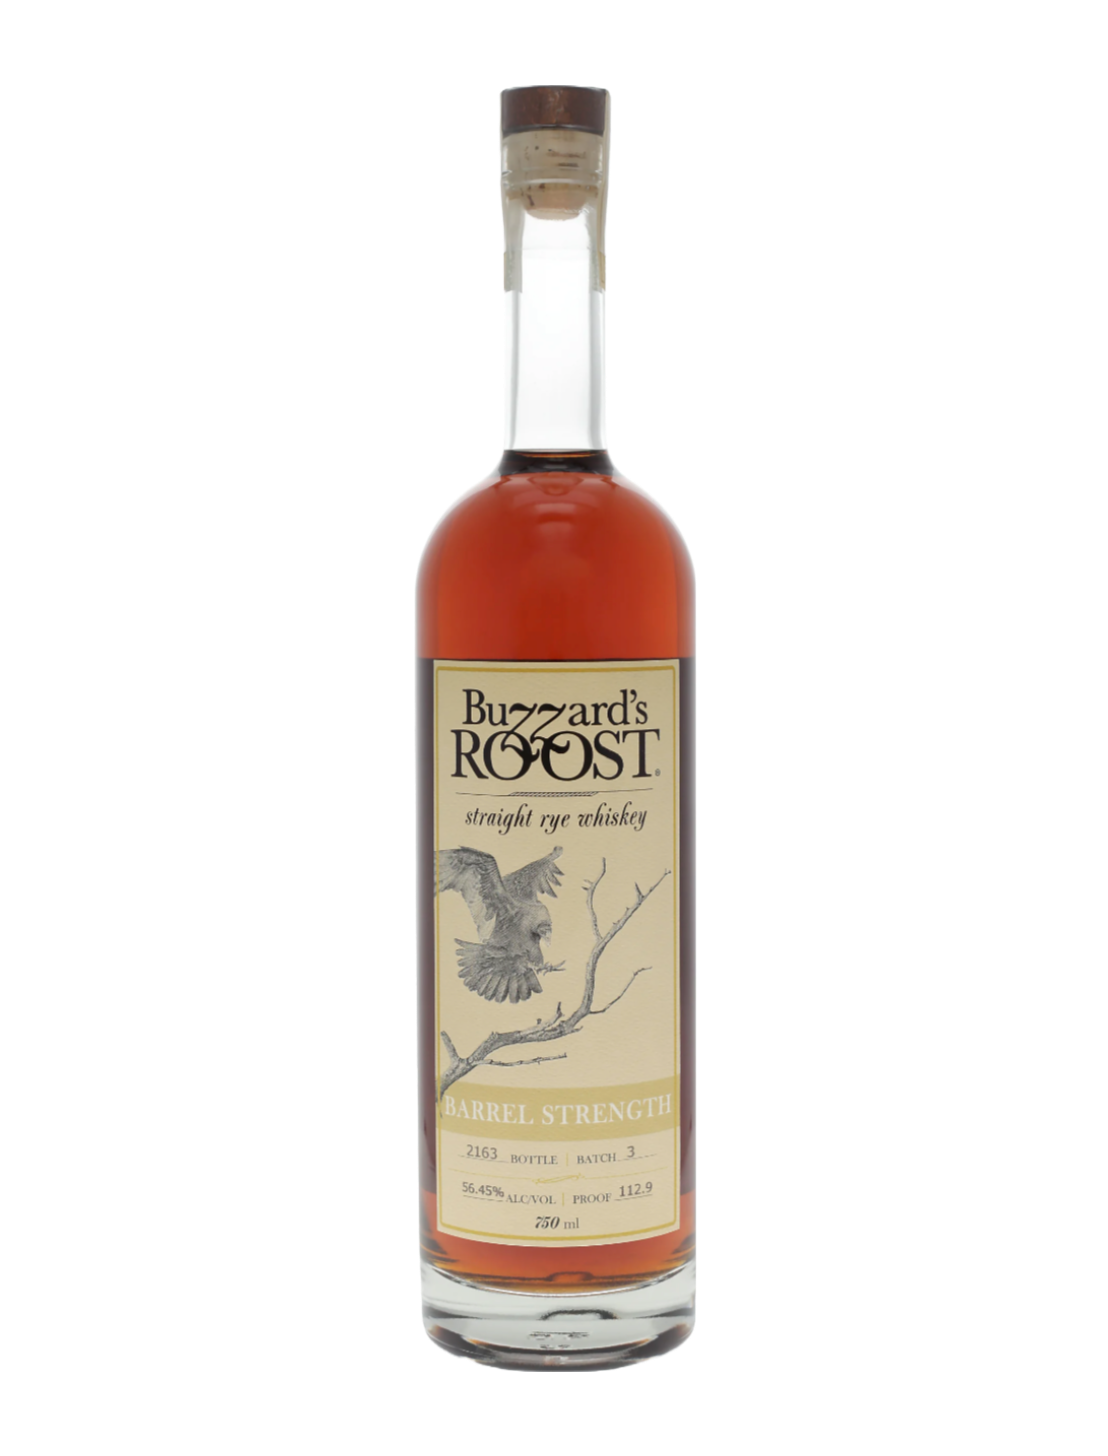 An elegant bottle of Buzzard's Roost Straight Rye Whiskey in front of a plain white background